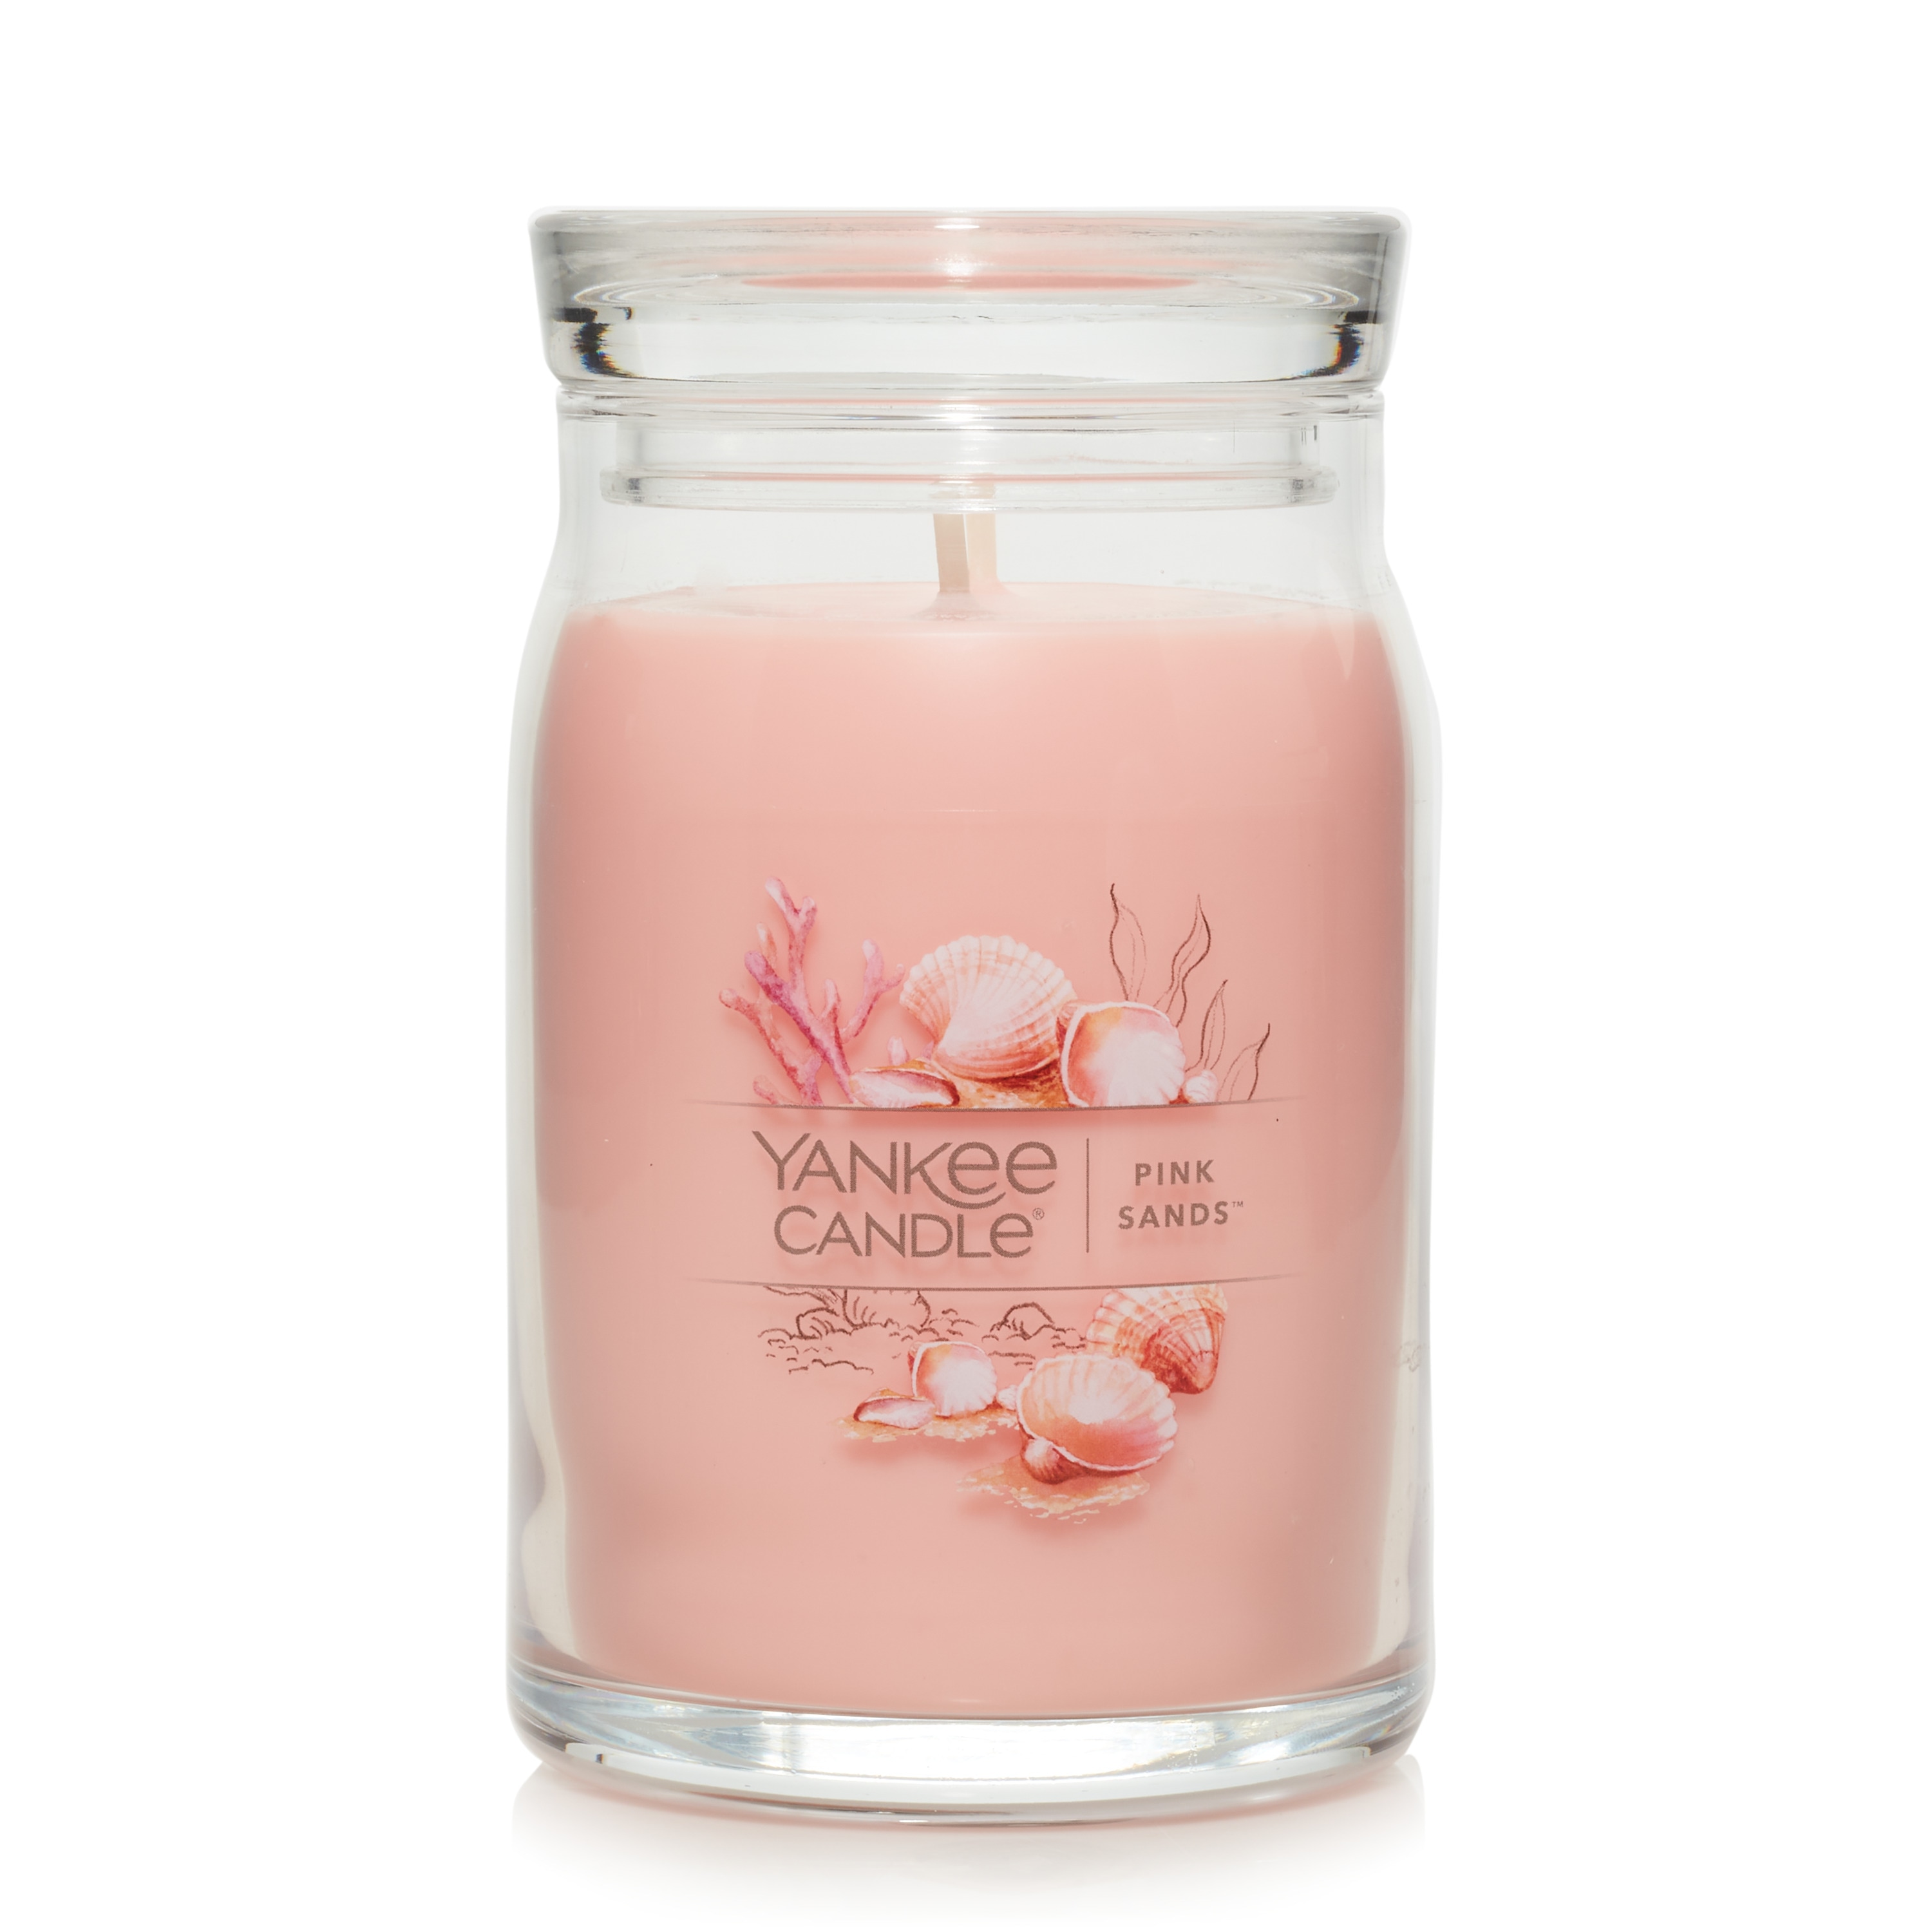 Yankee Candle 2-Wick Pink Sands Pink Jar Candle (Signature) in the